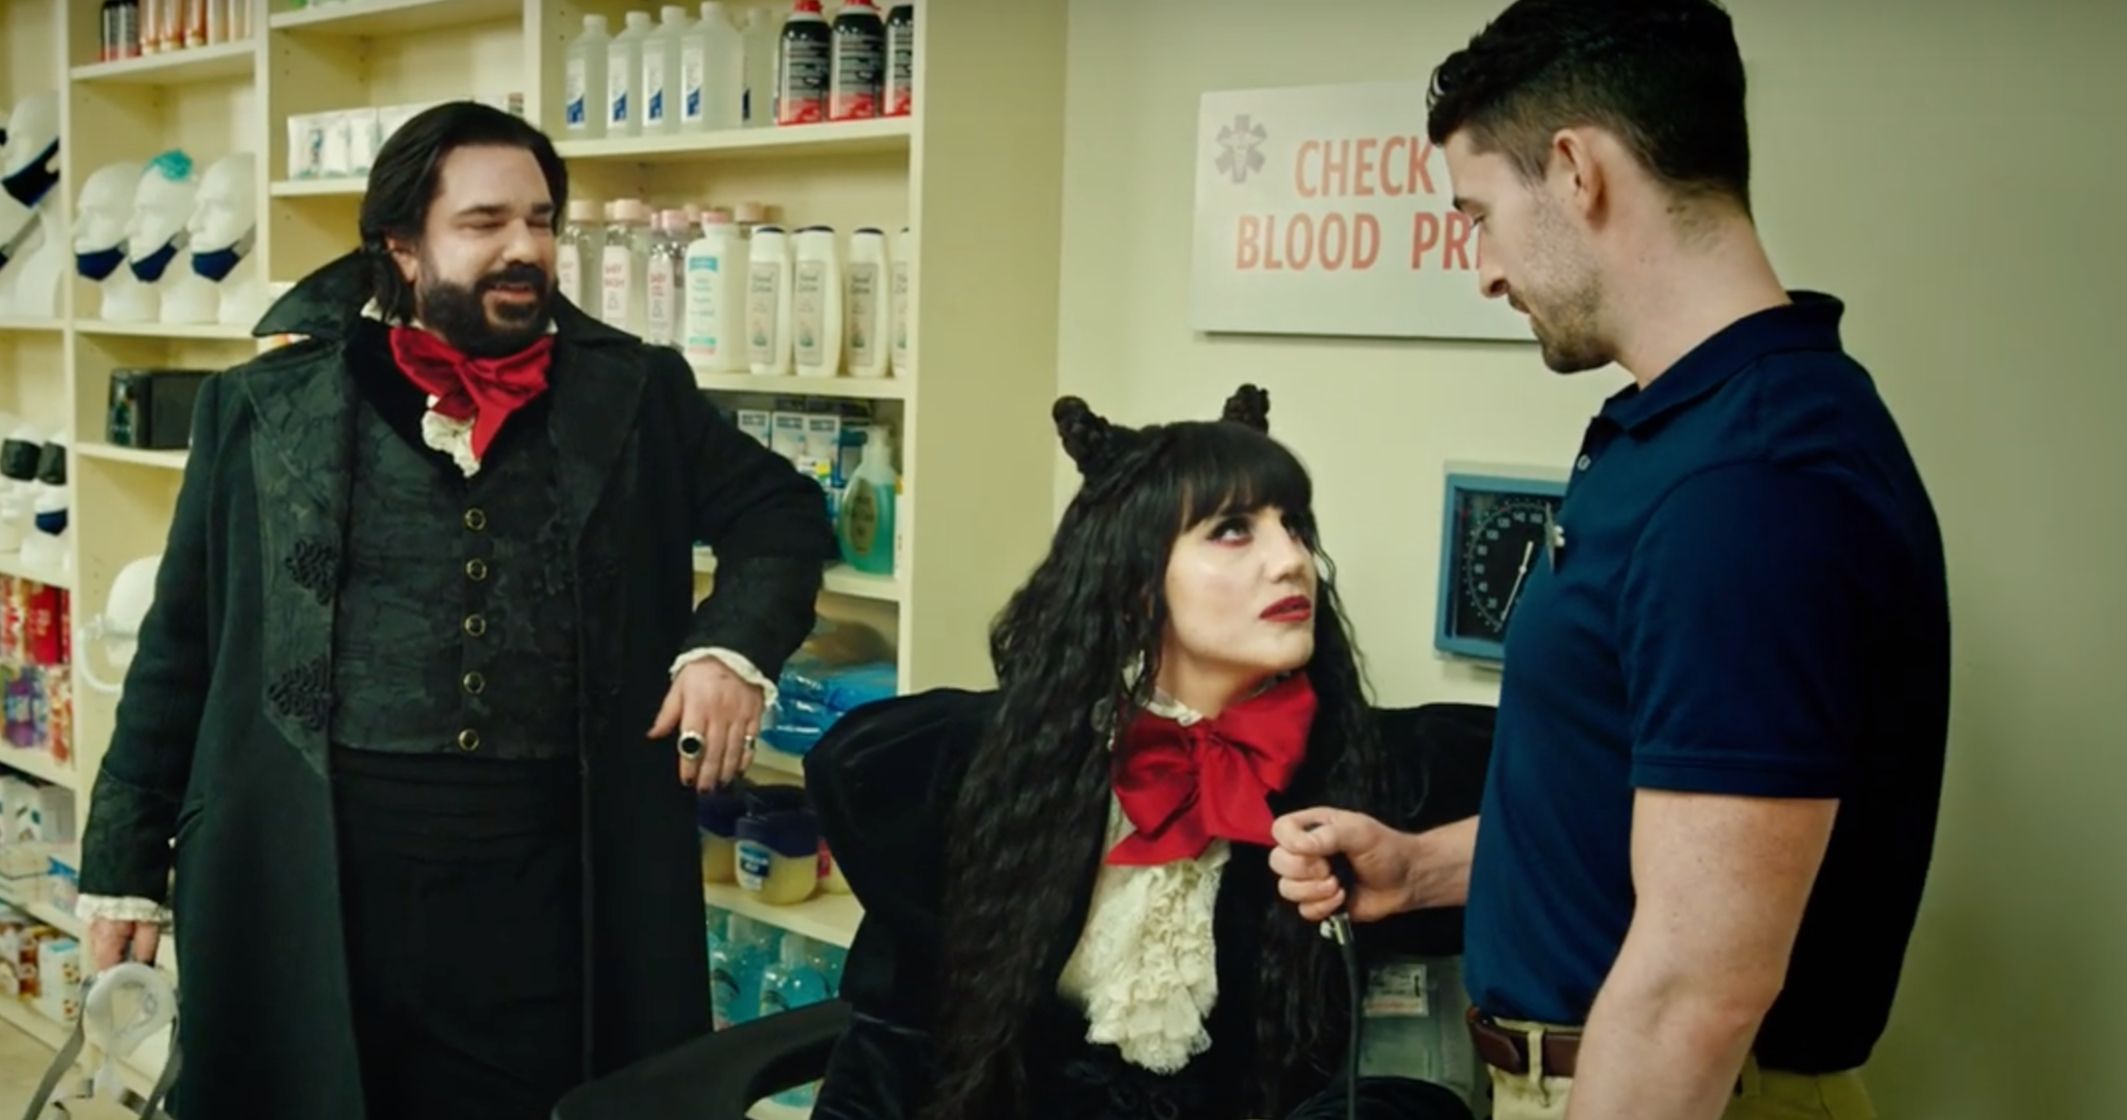 What We Do in the Shadows Season 2 Teasers Head to the Pharmacy for Sunscreen